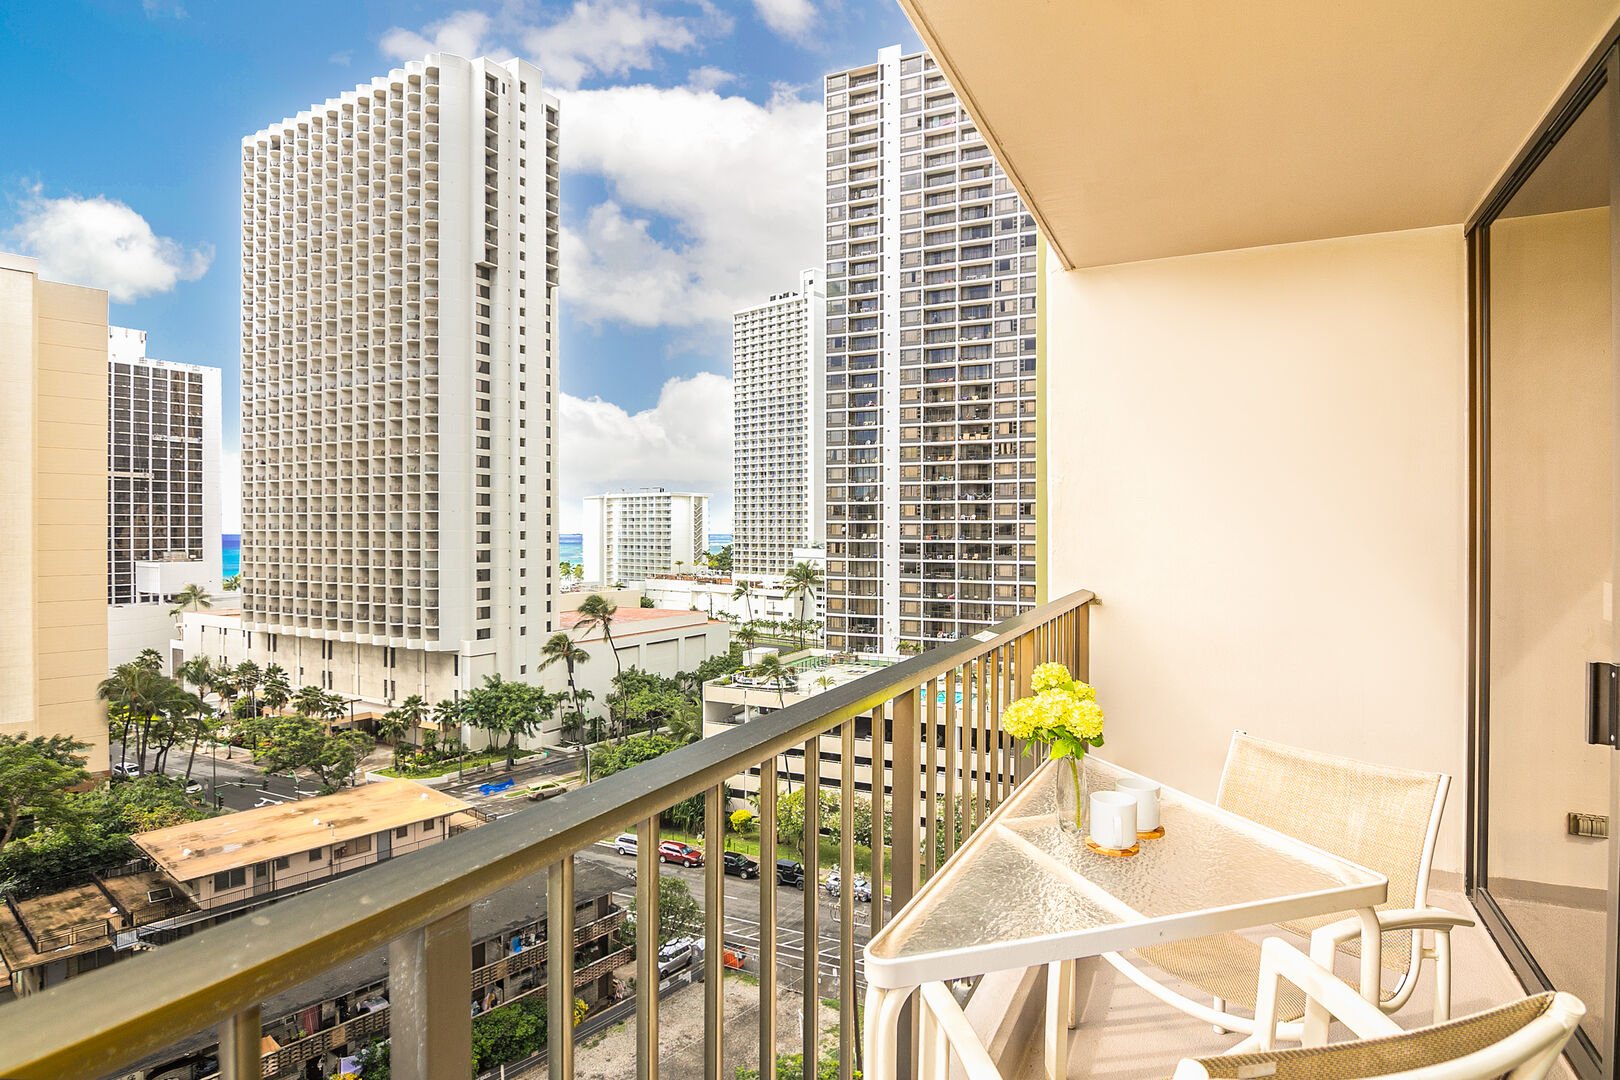 Great city views from your lanai